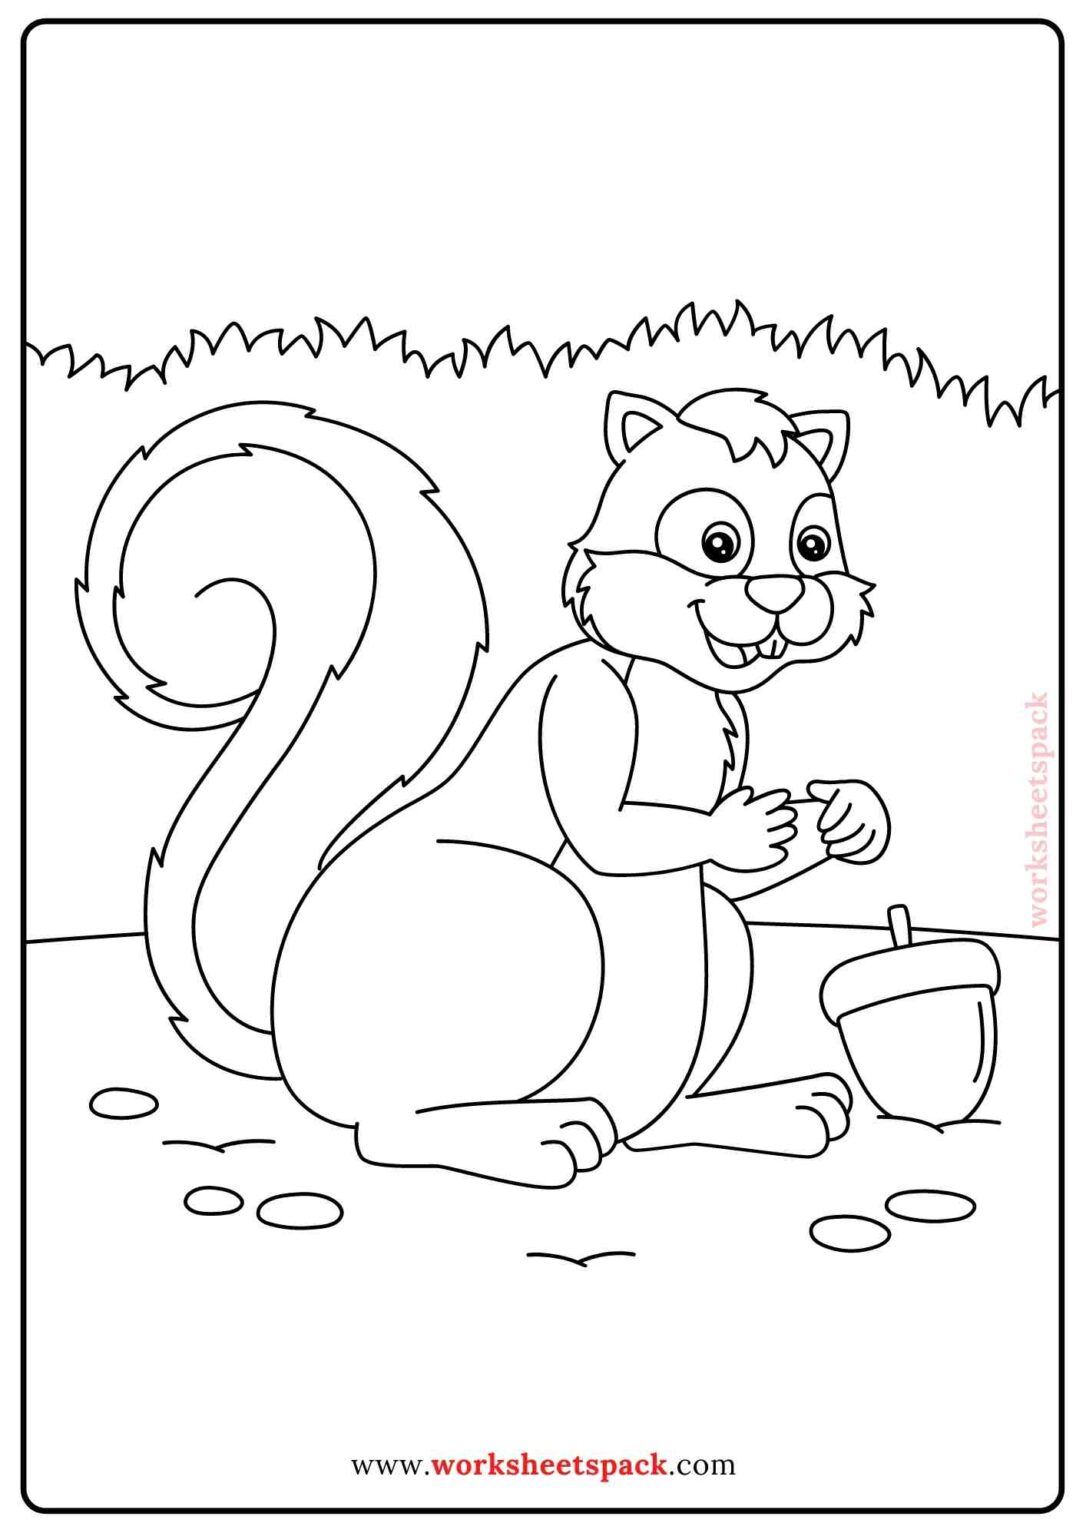 free-autumn-and-fall-coloring-pages-for-kids-worksheetspack